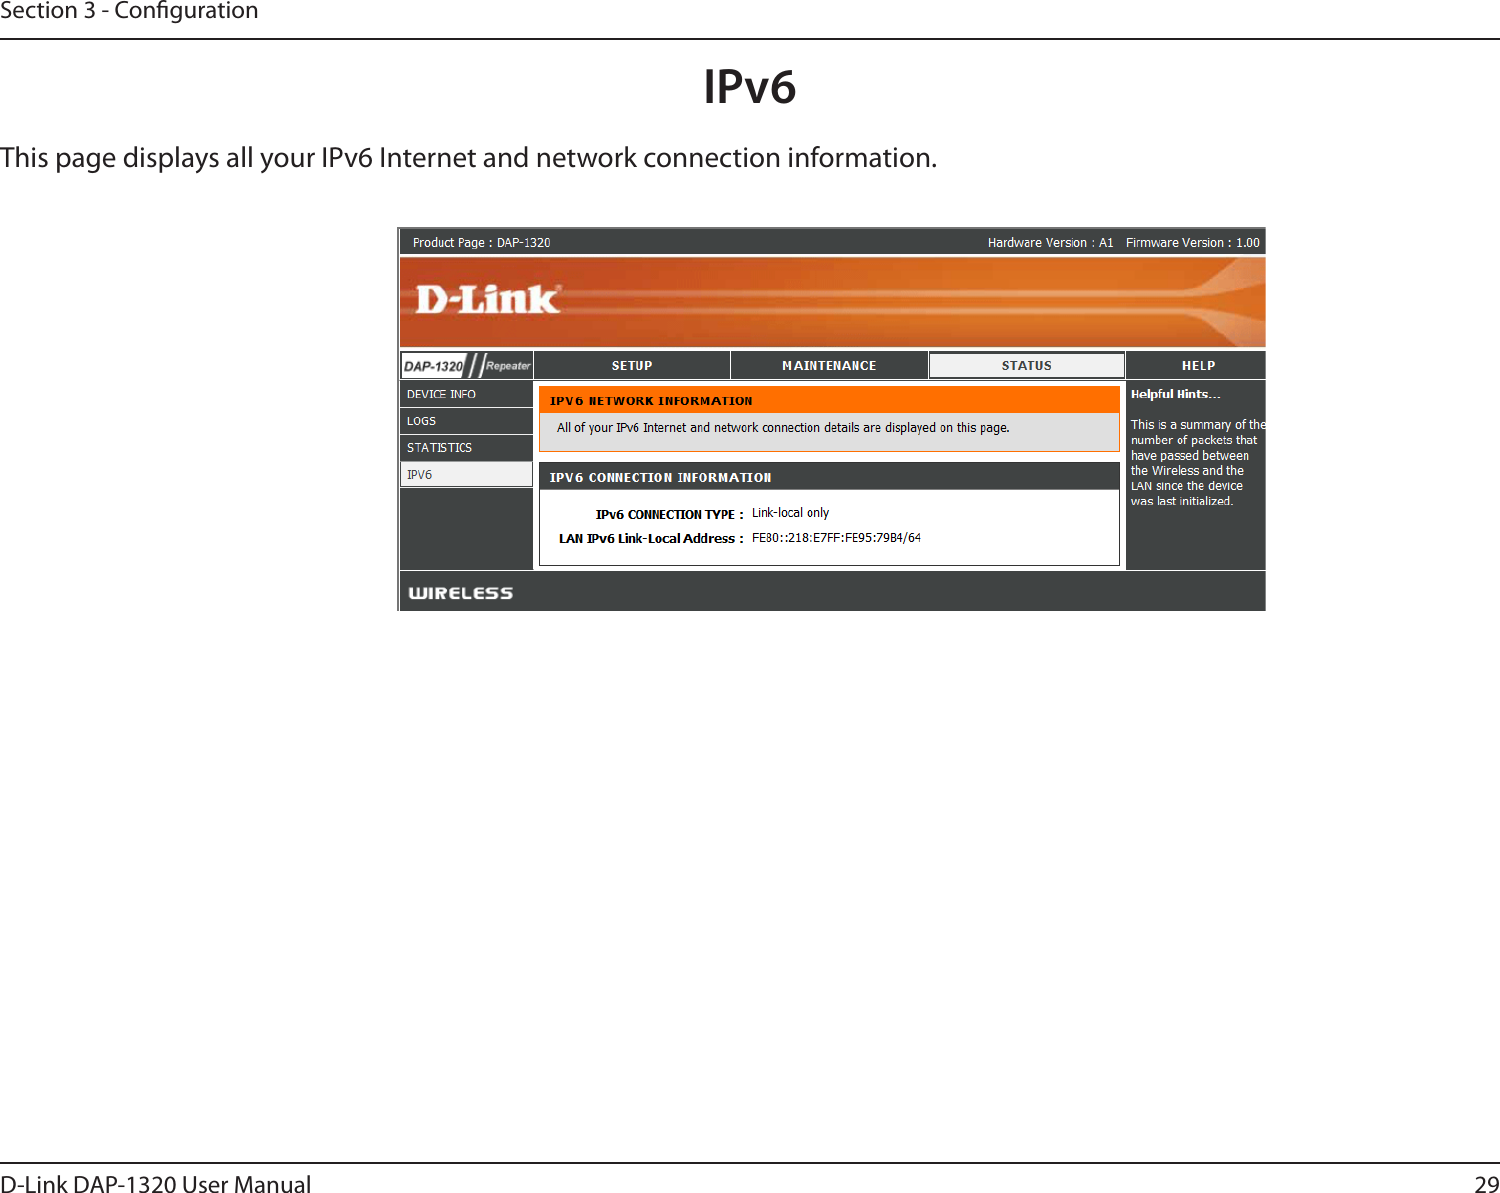 29D-Link DAP-1320 User ManualSection 3 - CongurationIPv6This page displays all your IPv6 Internet and network connection information.